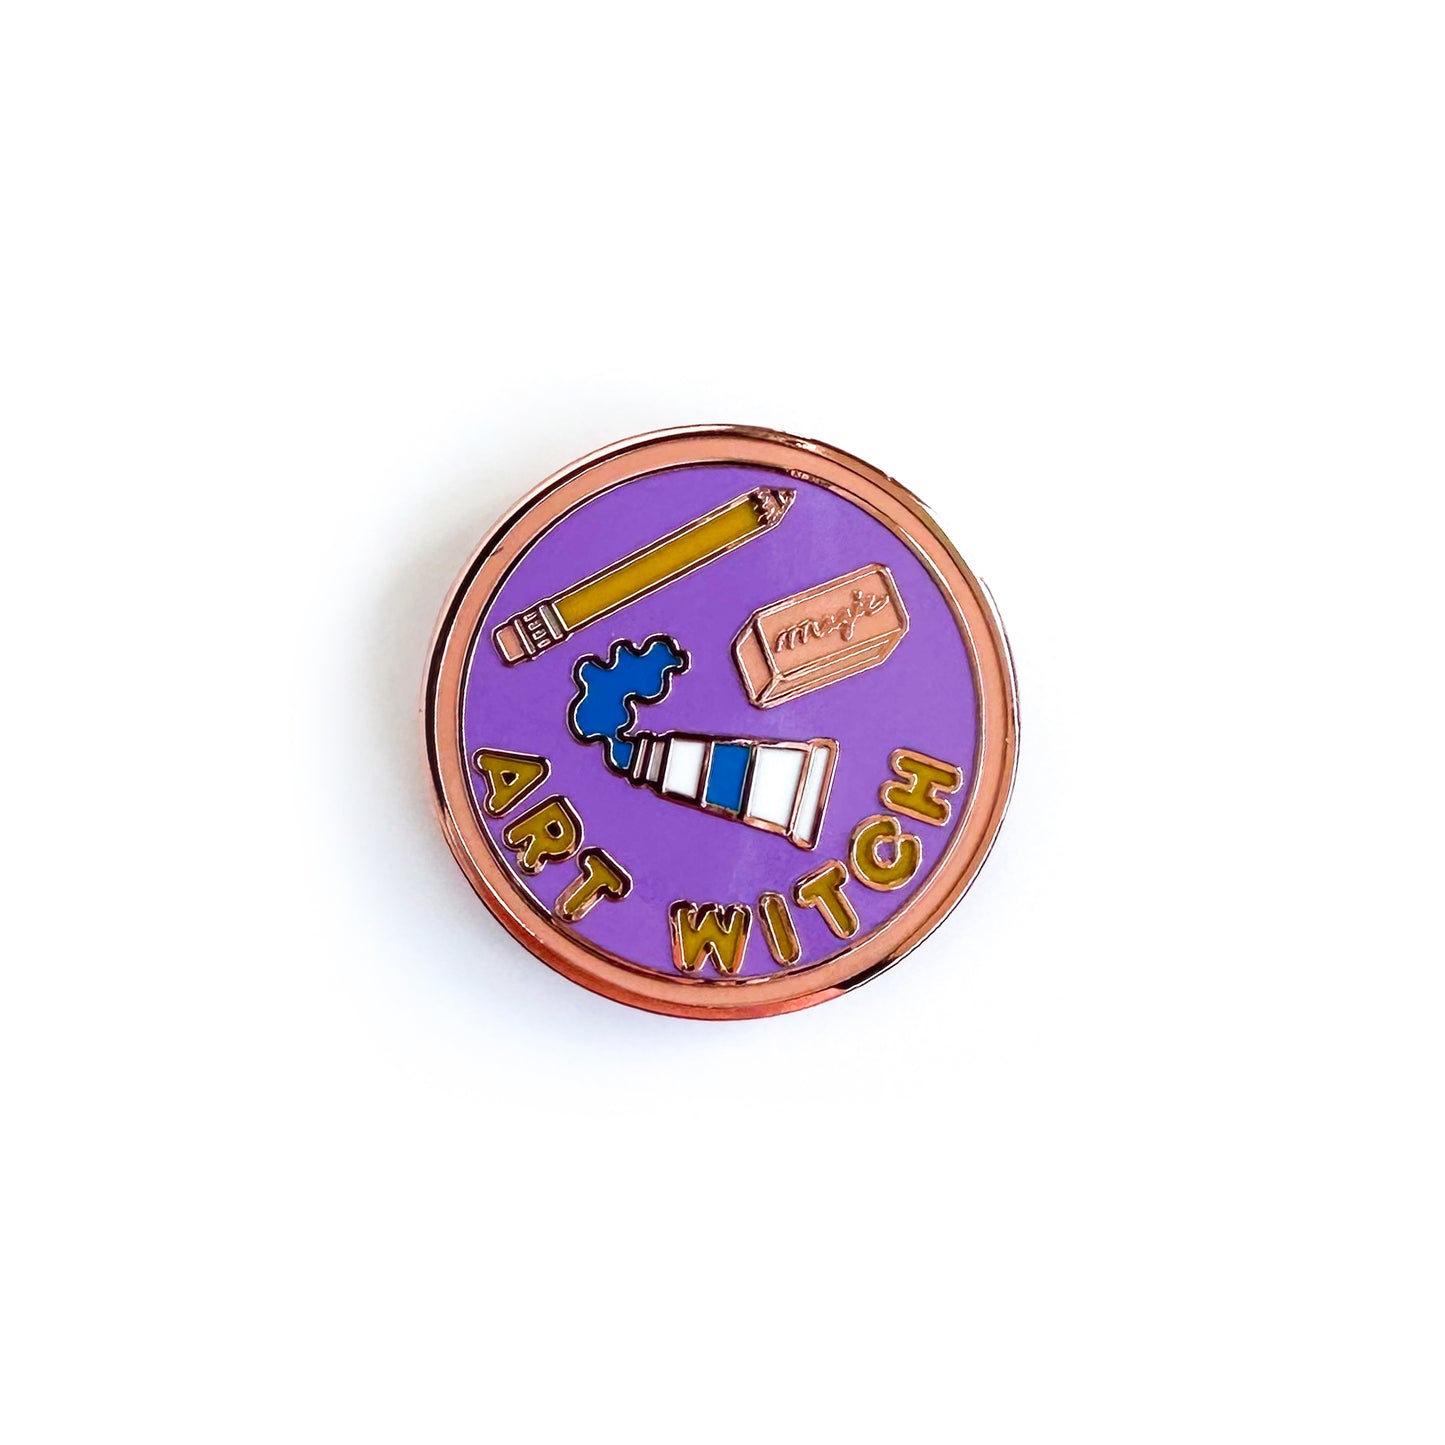 A circular enamel pin that has "Art Witch" on it in bubble letters with images of a paint tube, a pencil and a pink eraser on it. The background of the pin is purple with a pink border. 